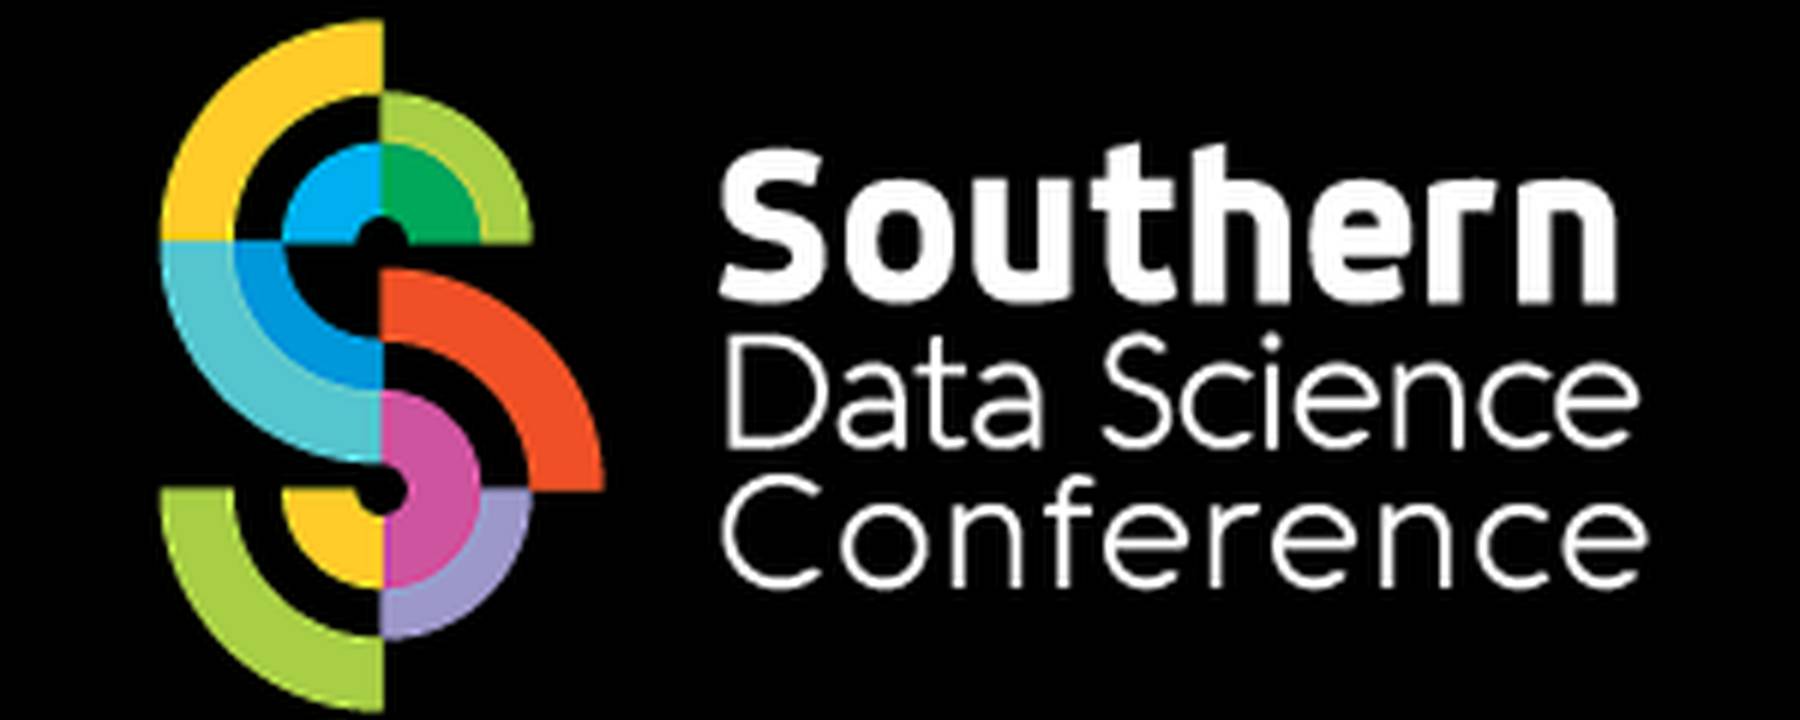 Southern Data Science Conference 2020